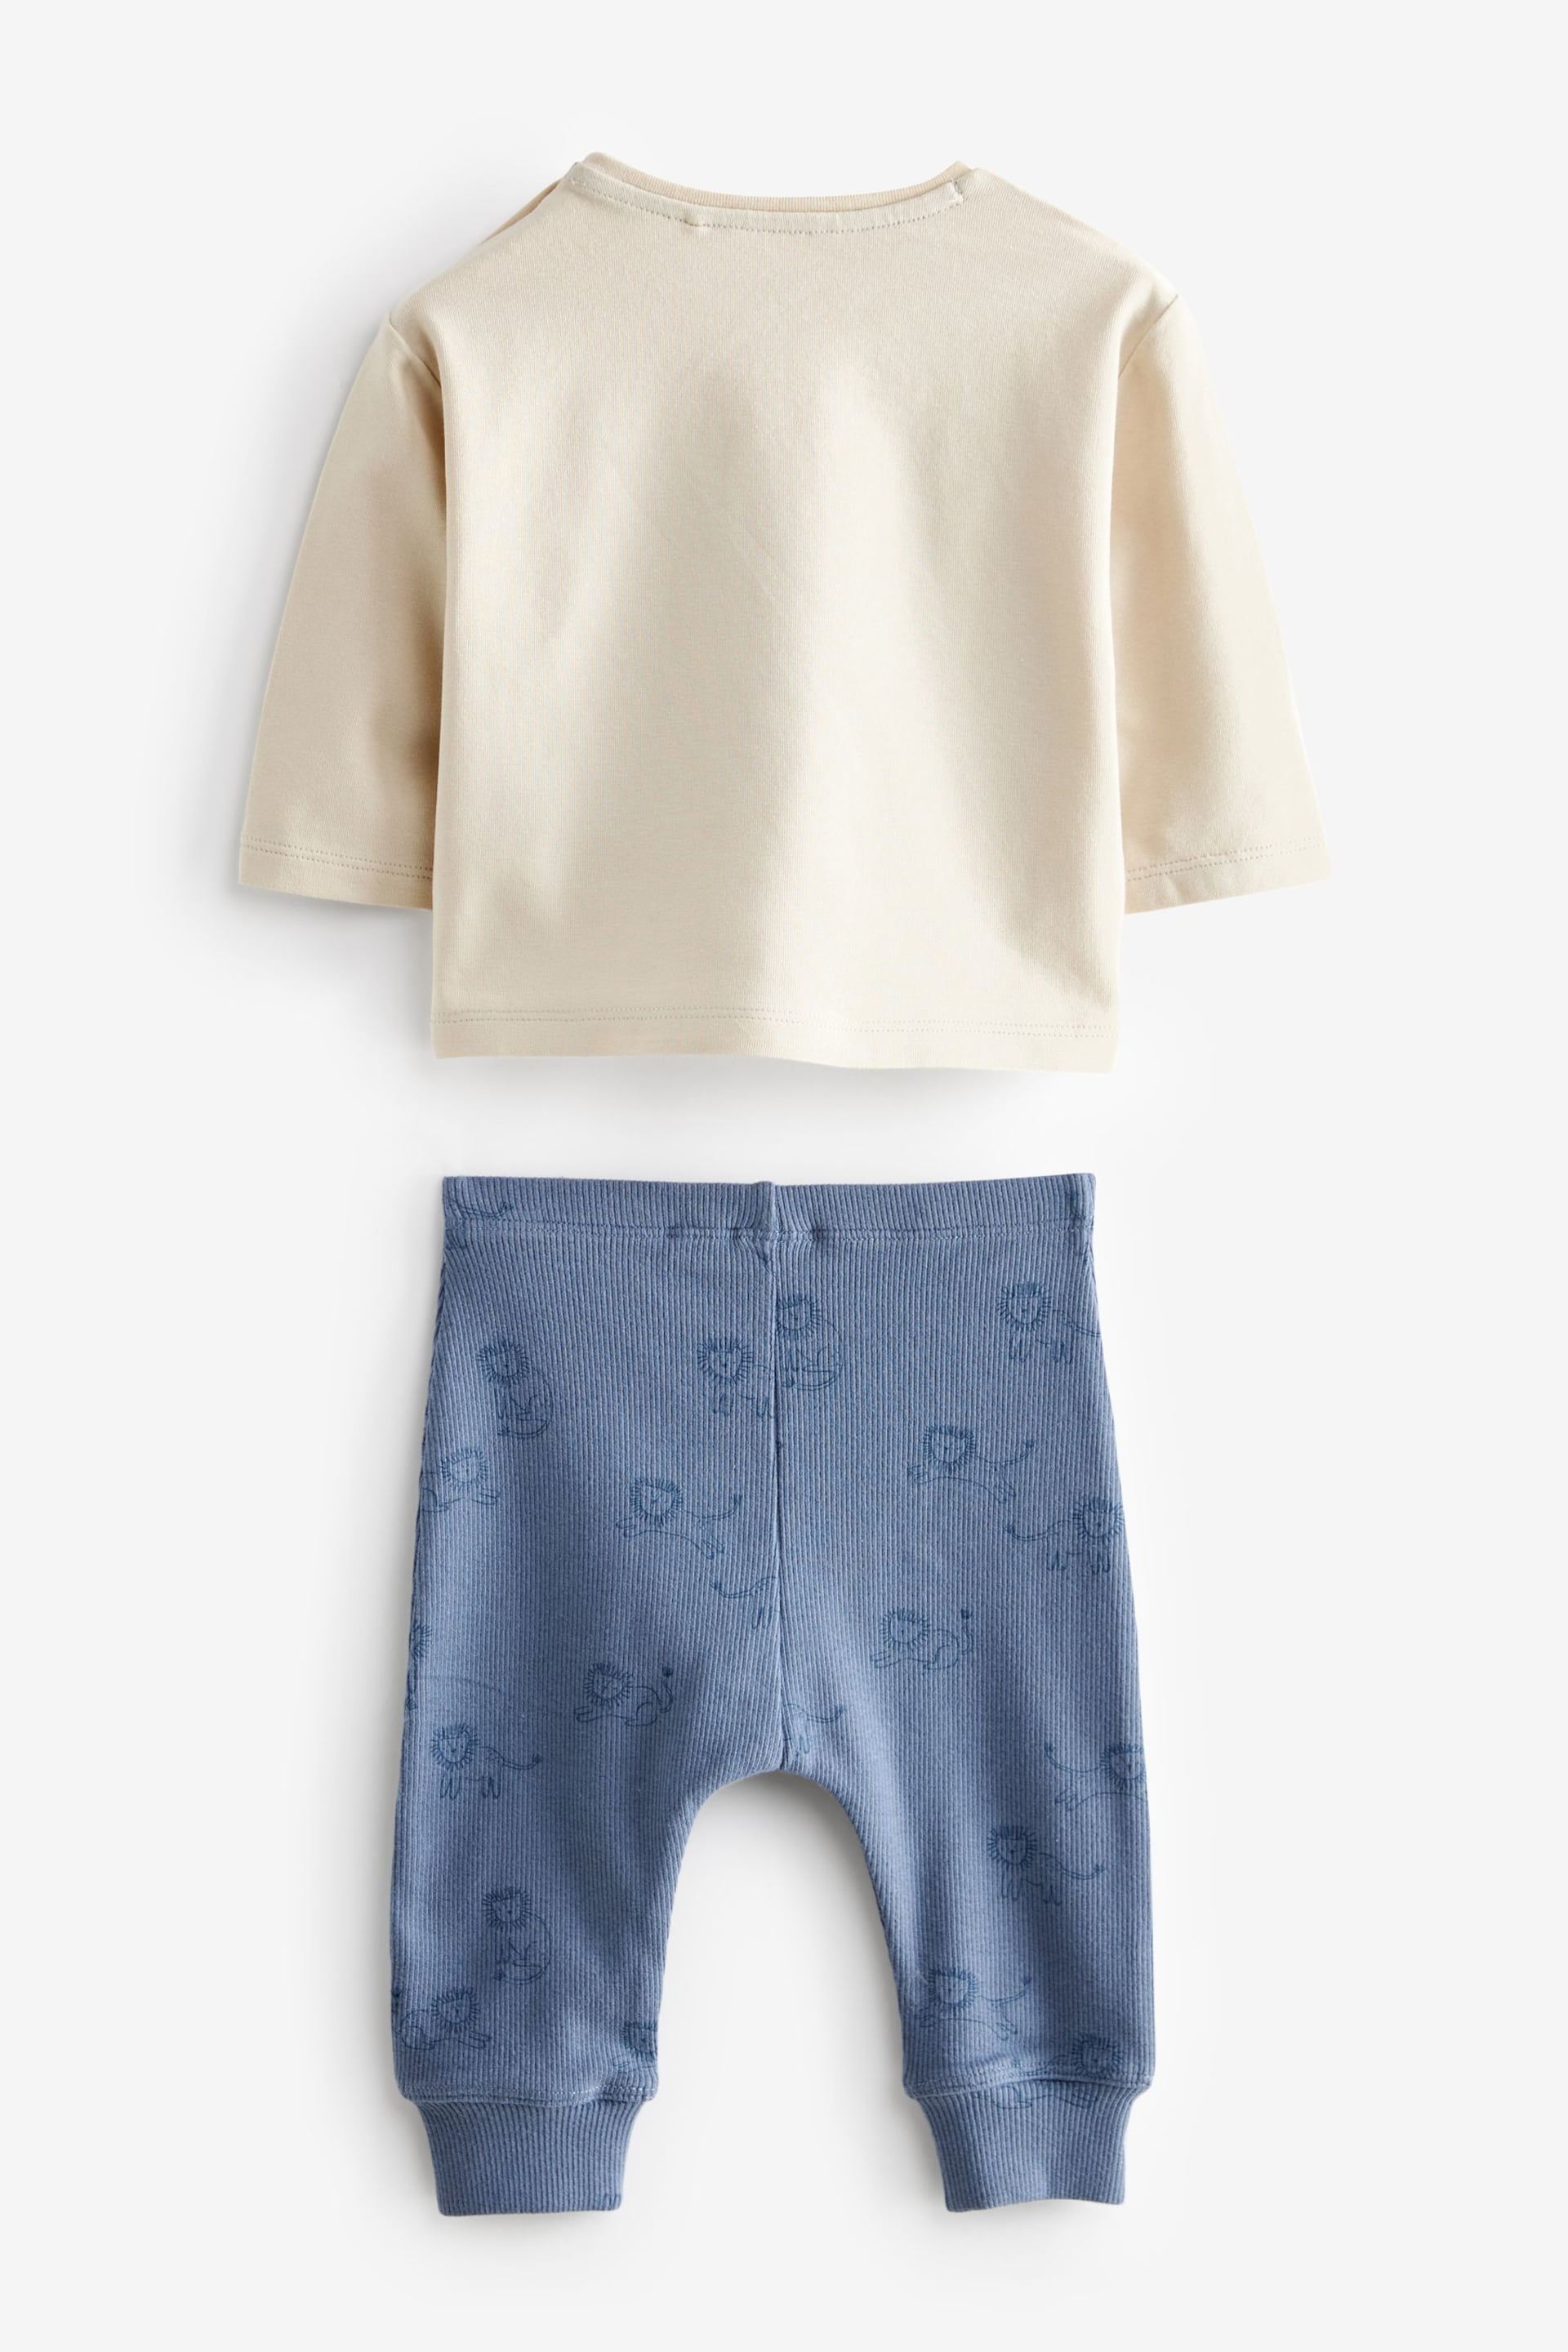 Blue/White Lion Baby Top and Leggings 2 Piece Set - Image 6 of 7